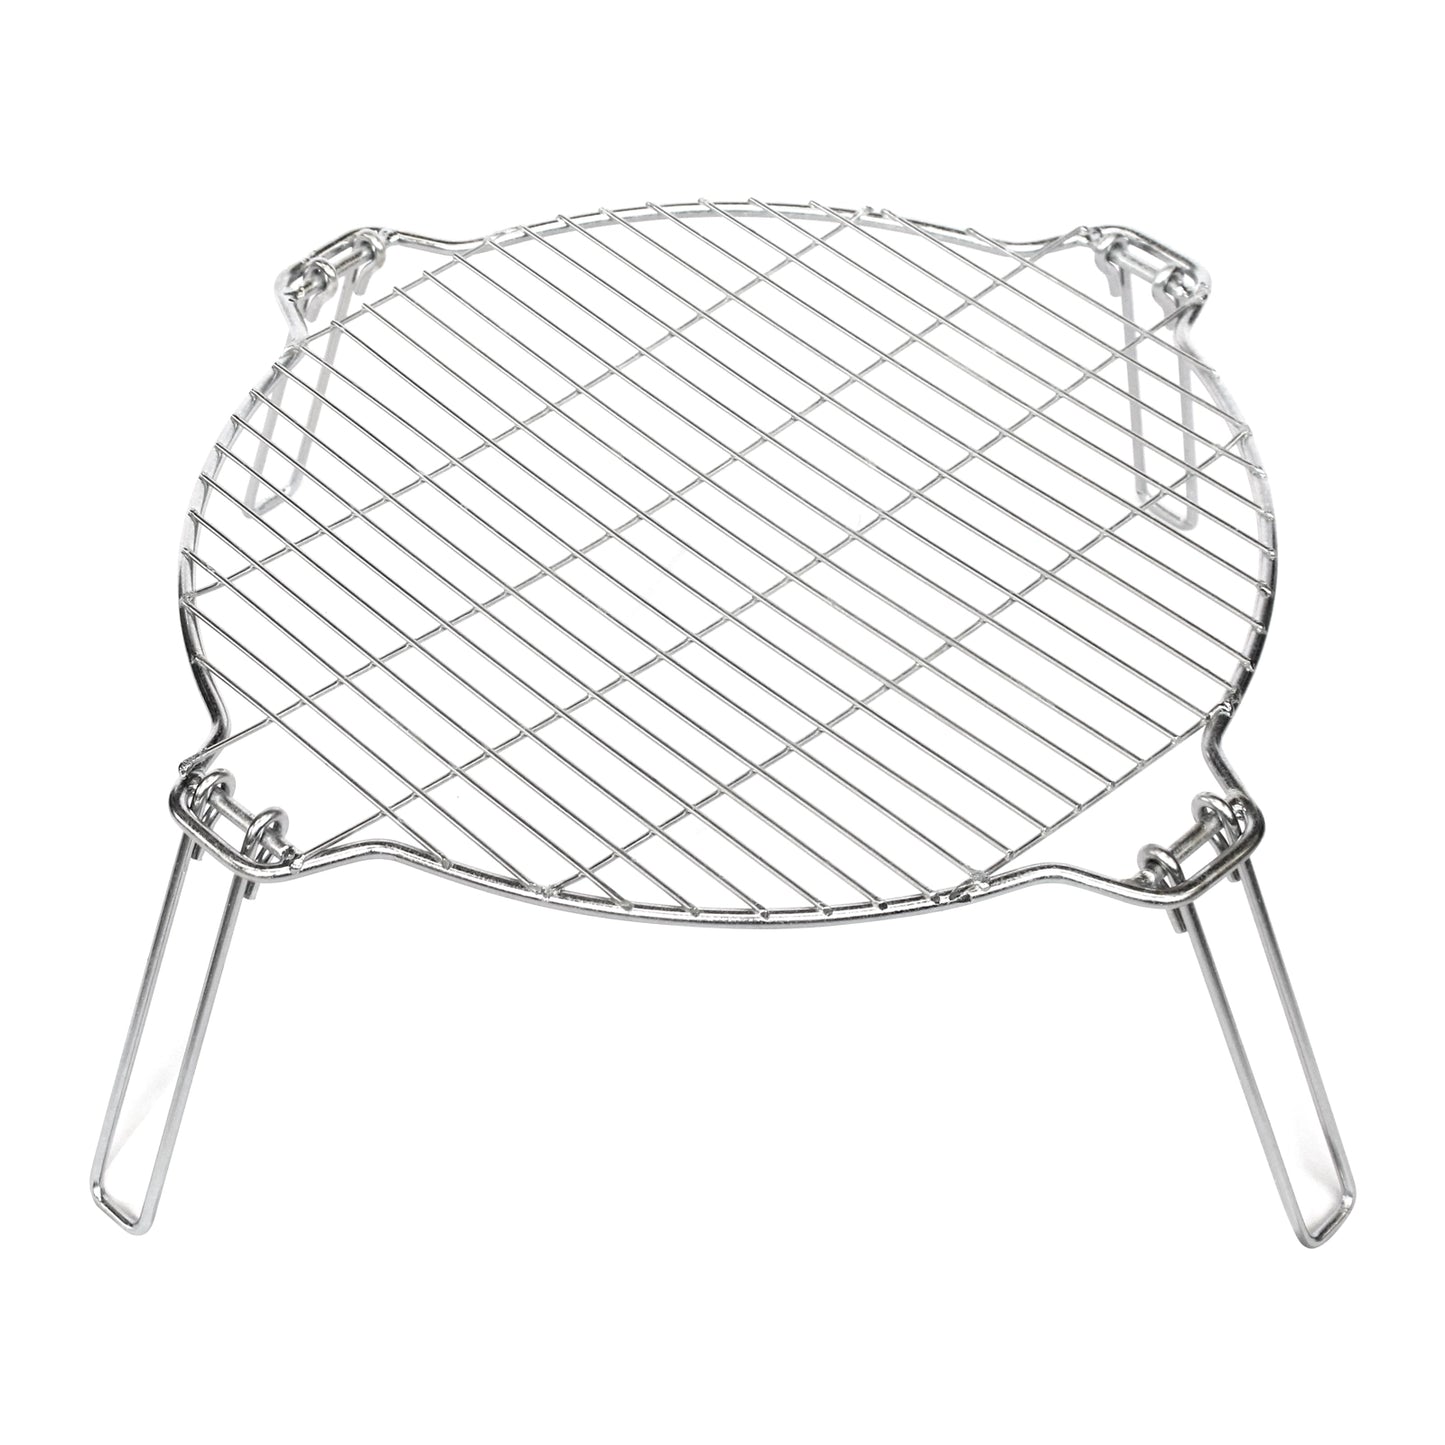 Collapsible Stand for Outdoor Cooking, BBQ, Braai and Camping